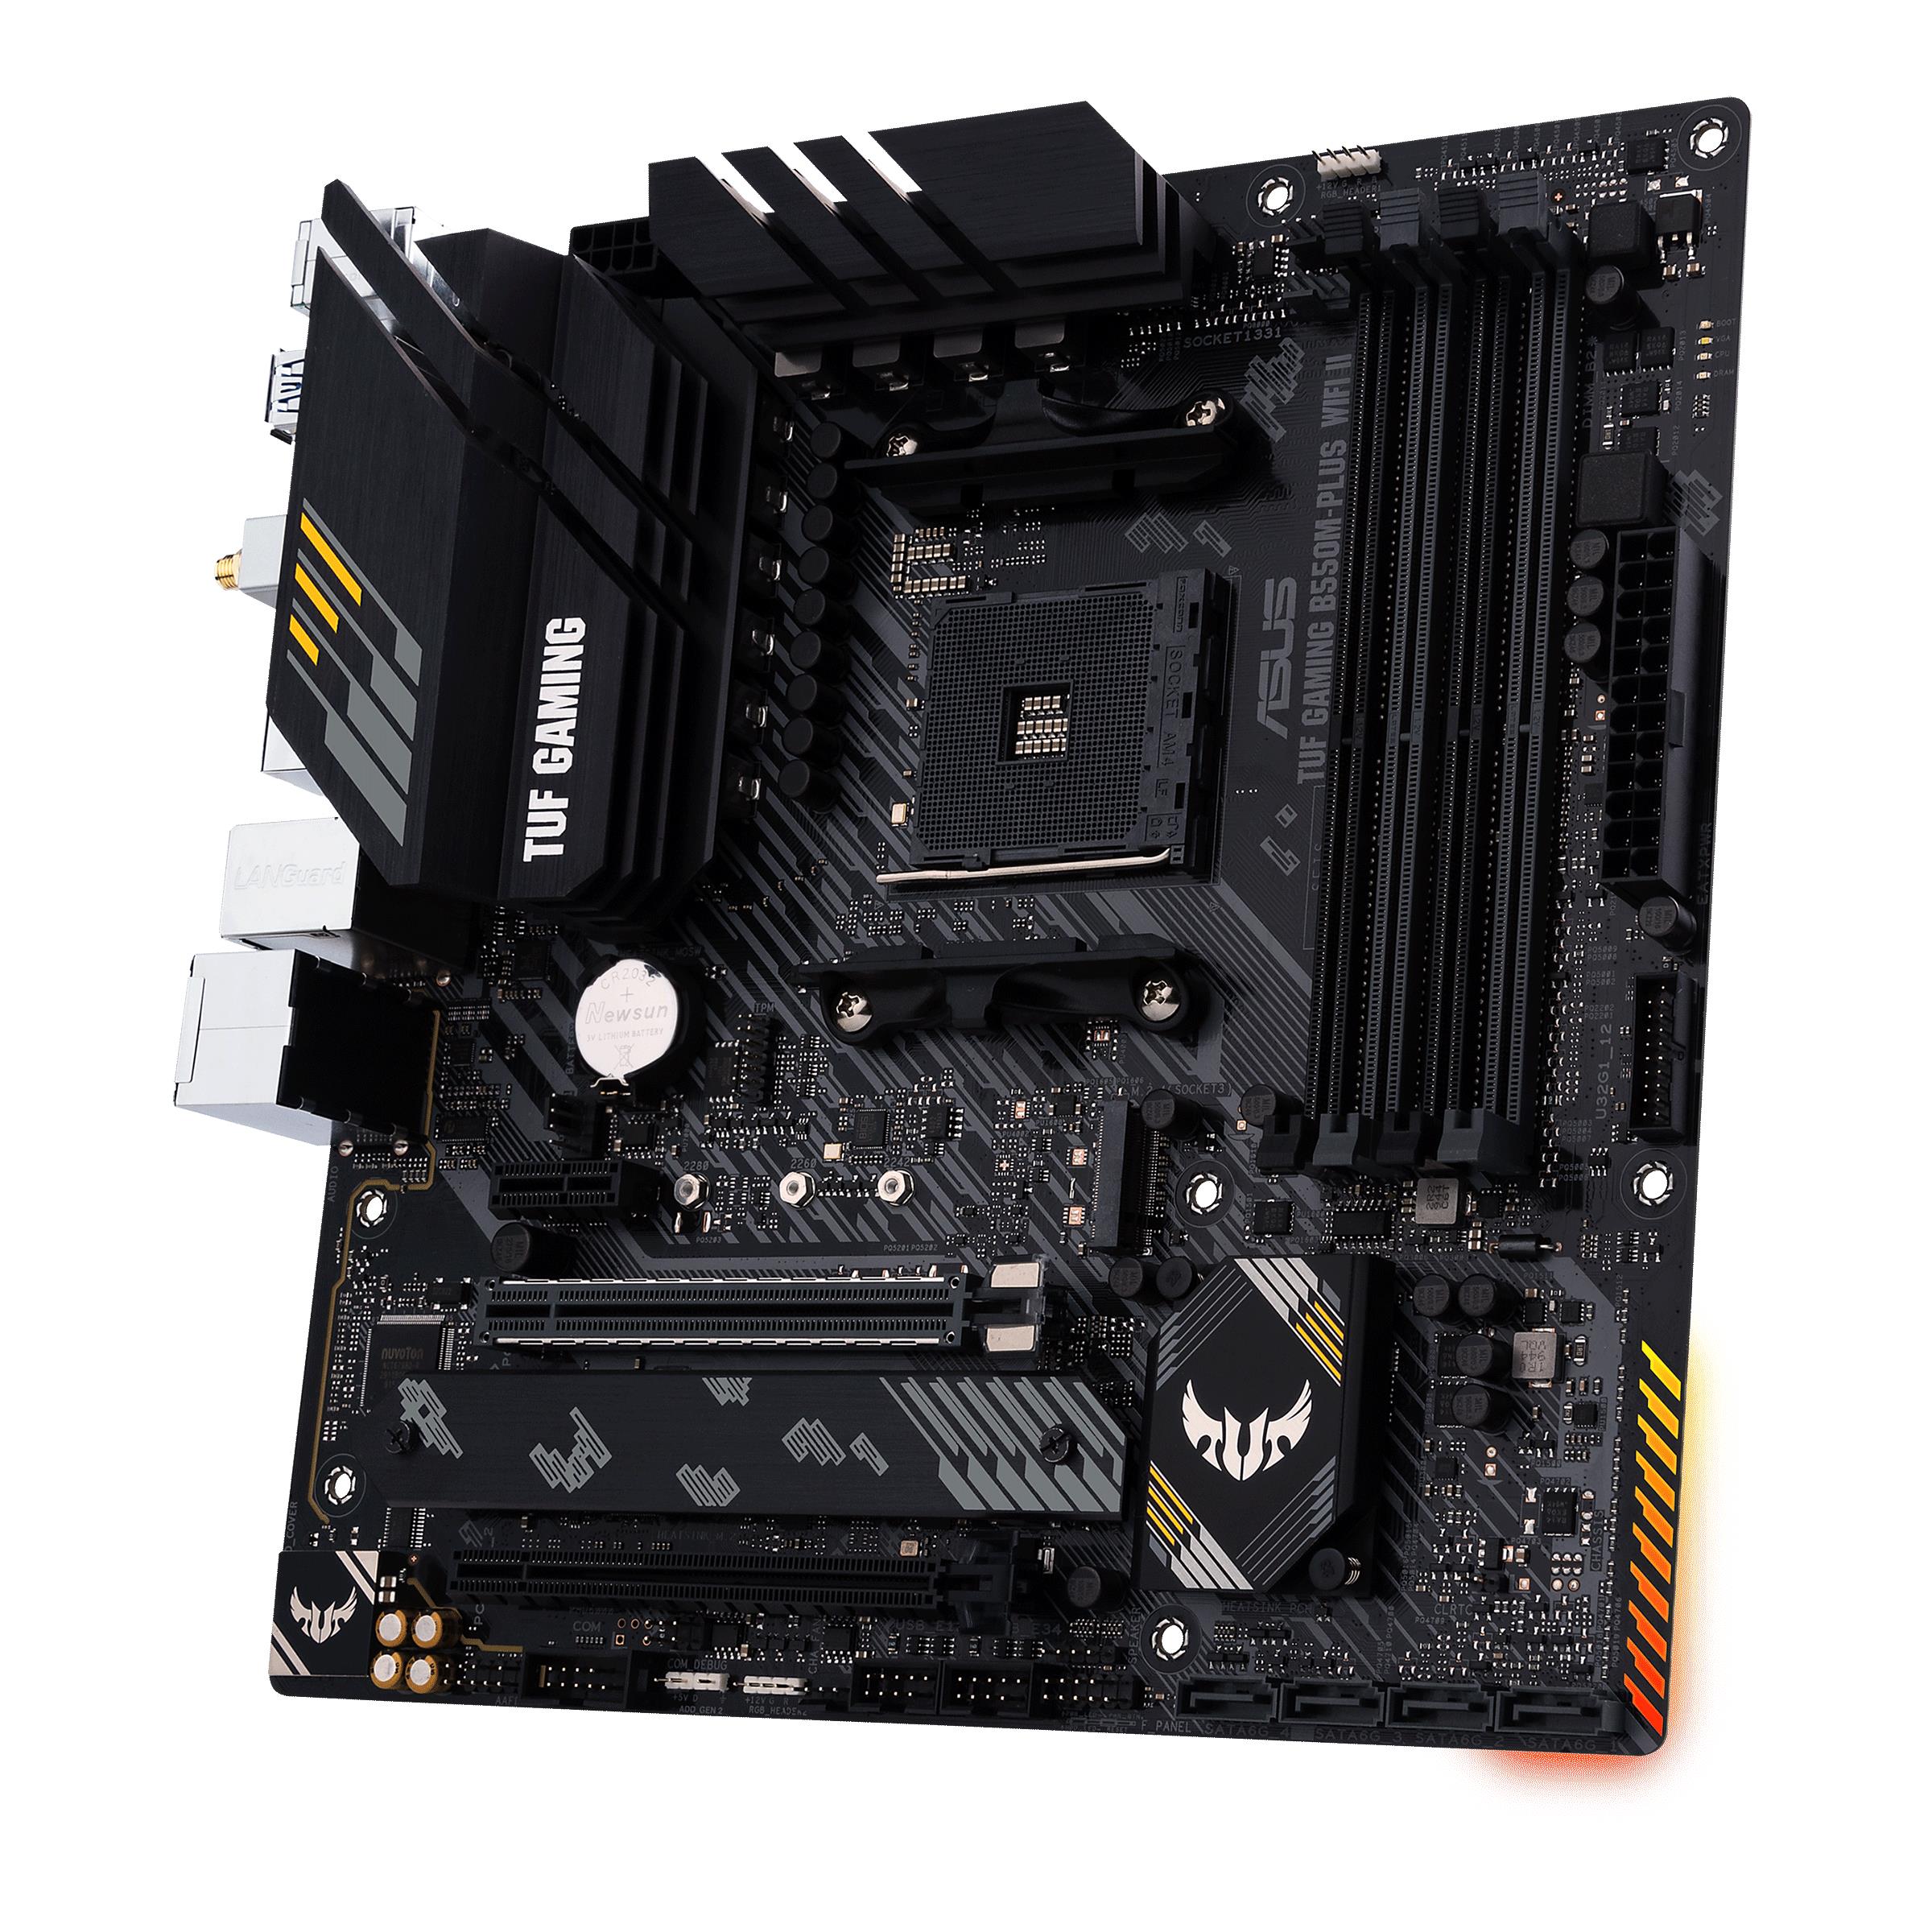 Asus Scheda Madre Mainboard AM5 ATX - 90MB1BK0-M0EAY0 TUF GAMING X670E-PLUS  WIFI X670